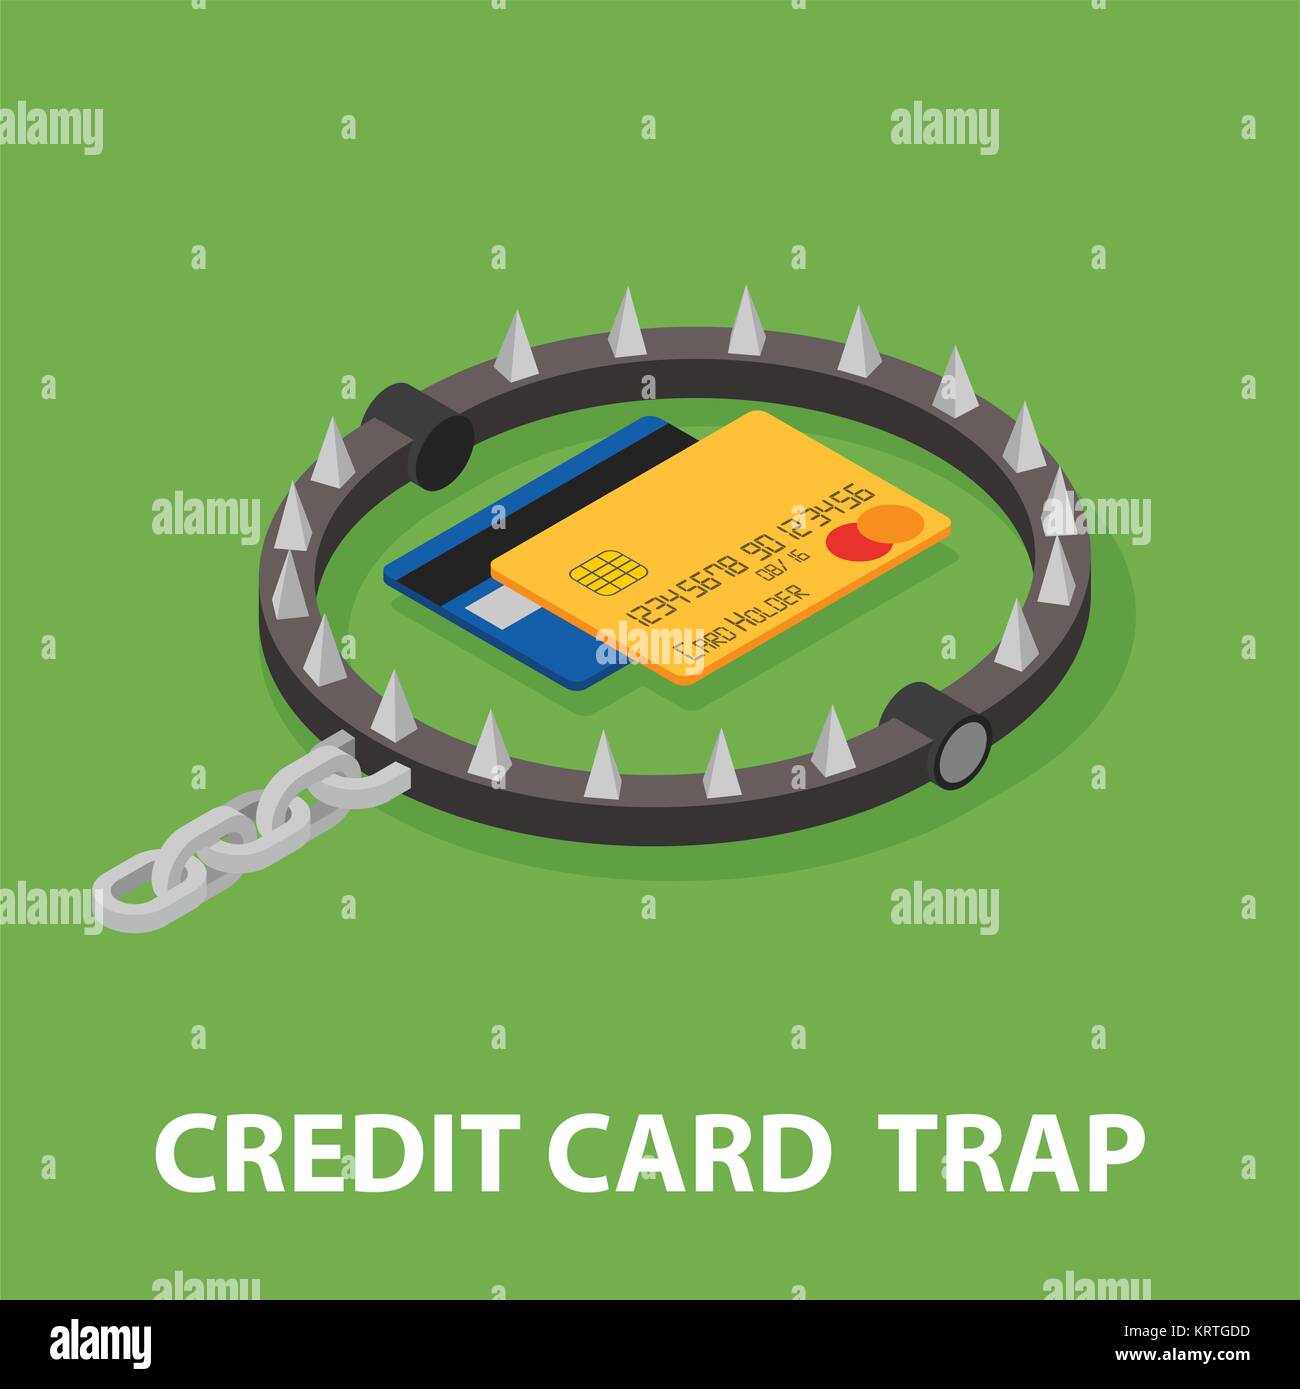 The trap of credit card with their high interest rates. Isometric illustration. Stock Vector